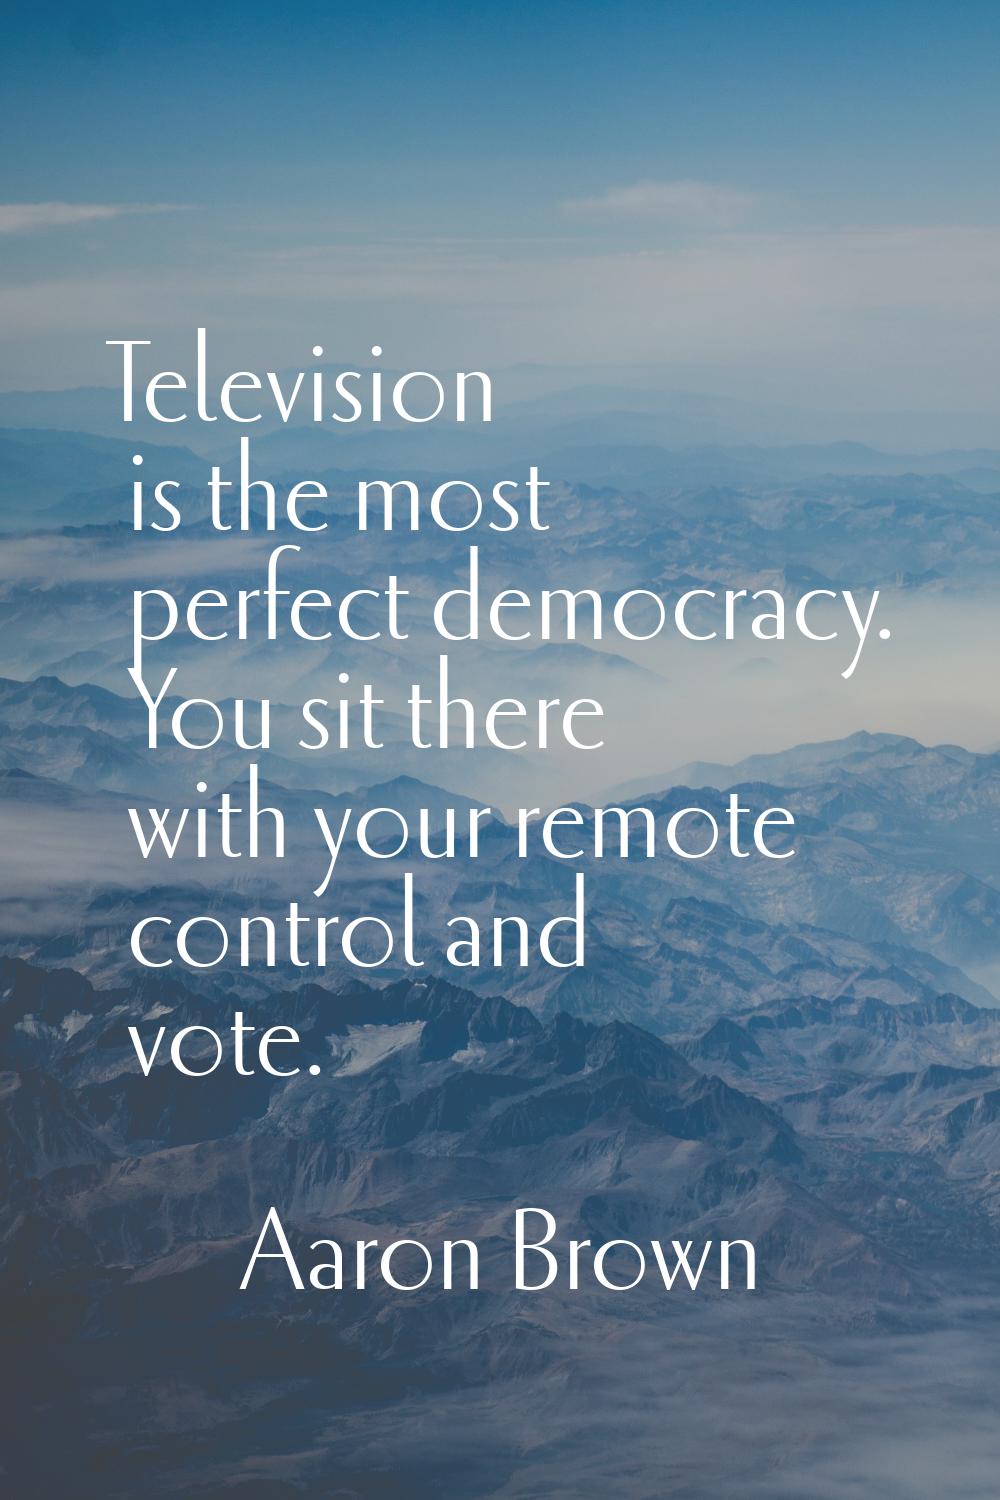 Television is the most perfect democracy. You sit there with your remote control and vote.